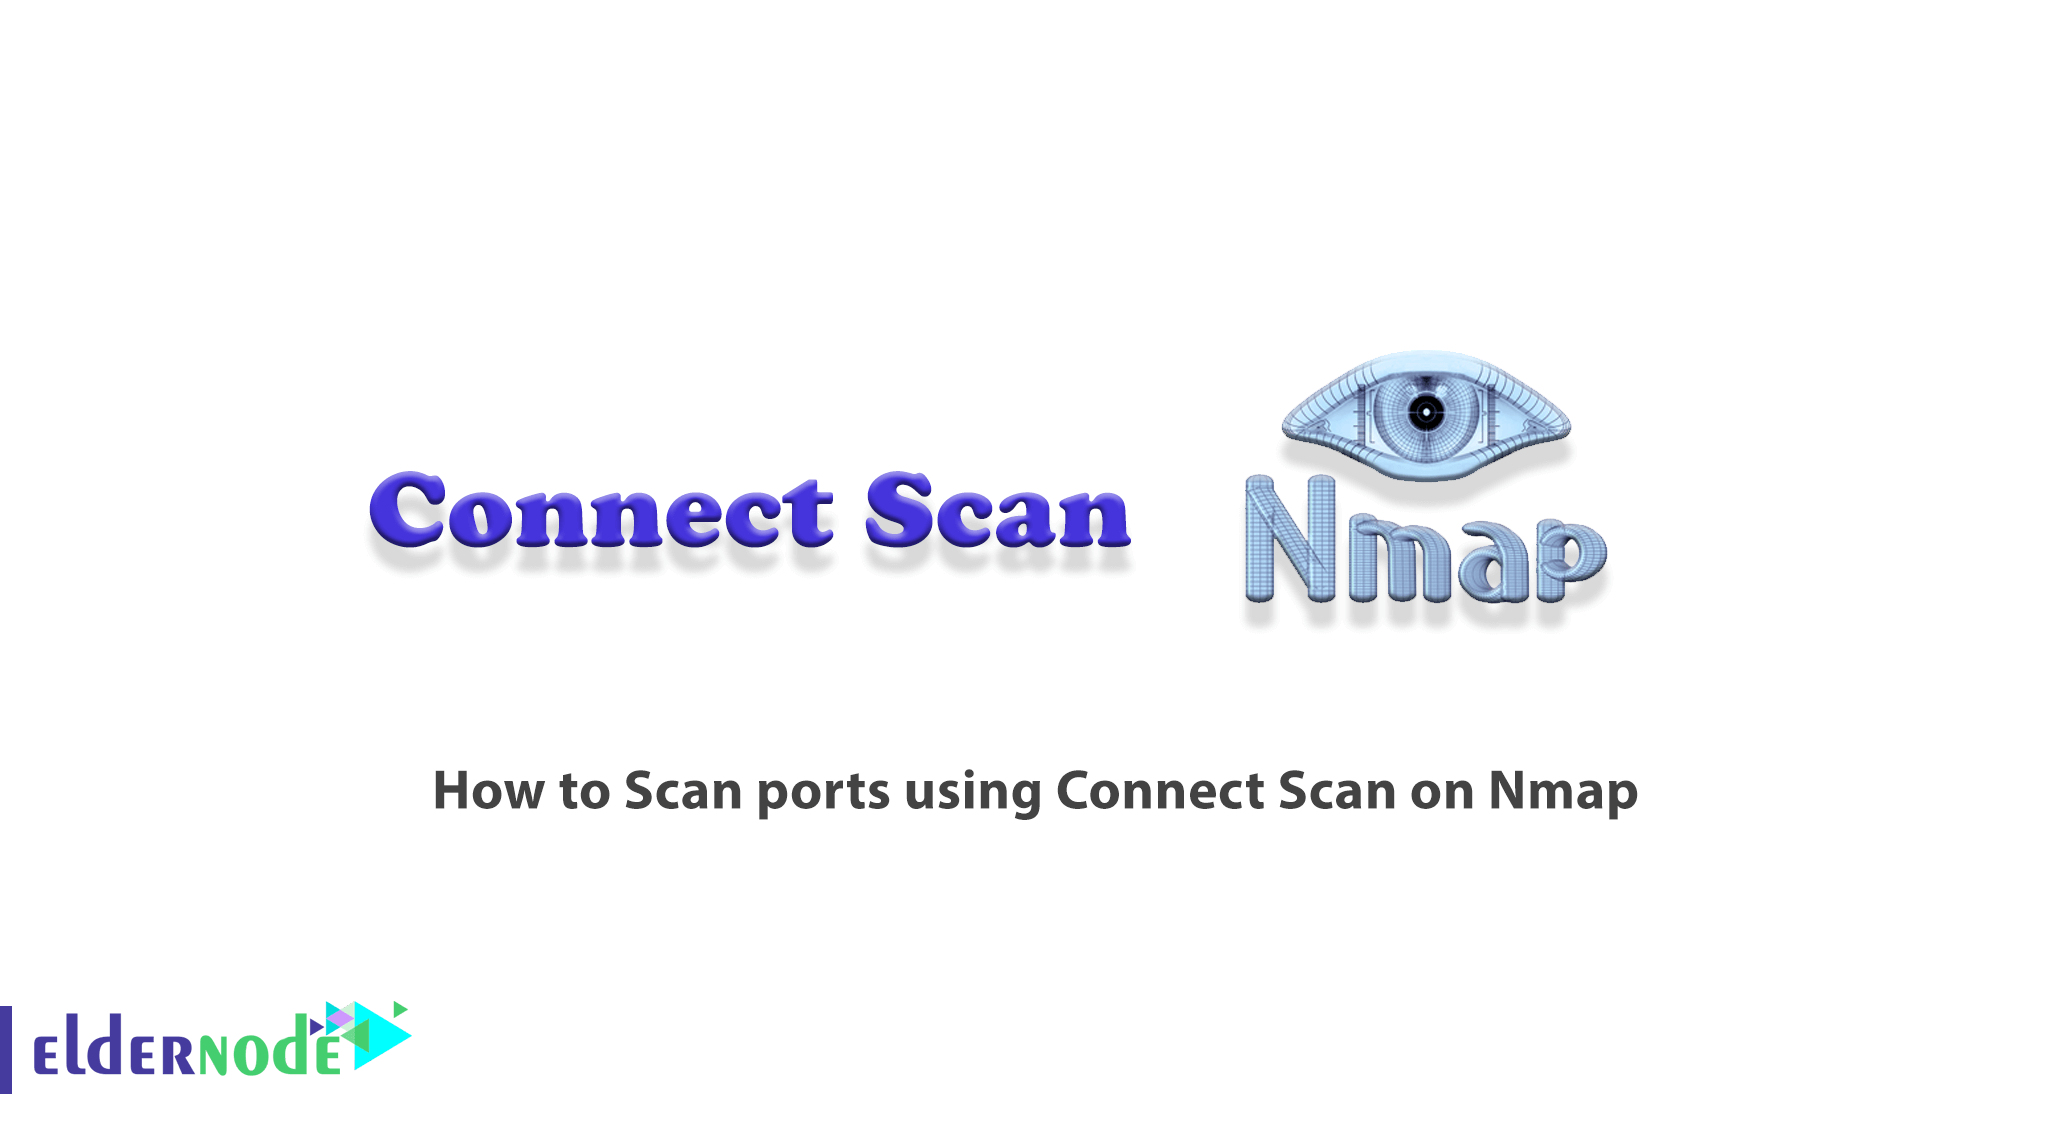 How to Scan ports using Connect Scan on Nmap